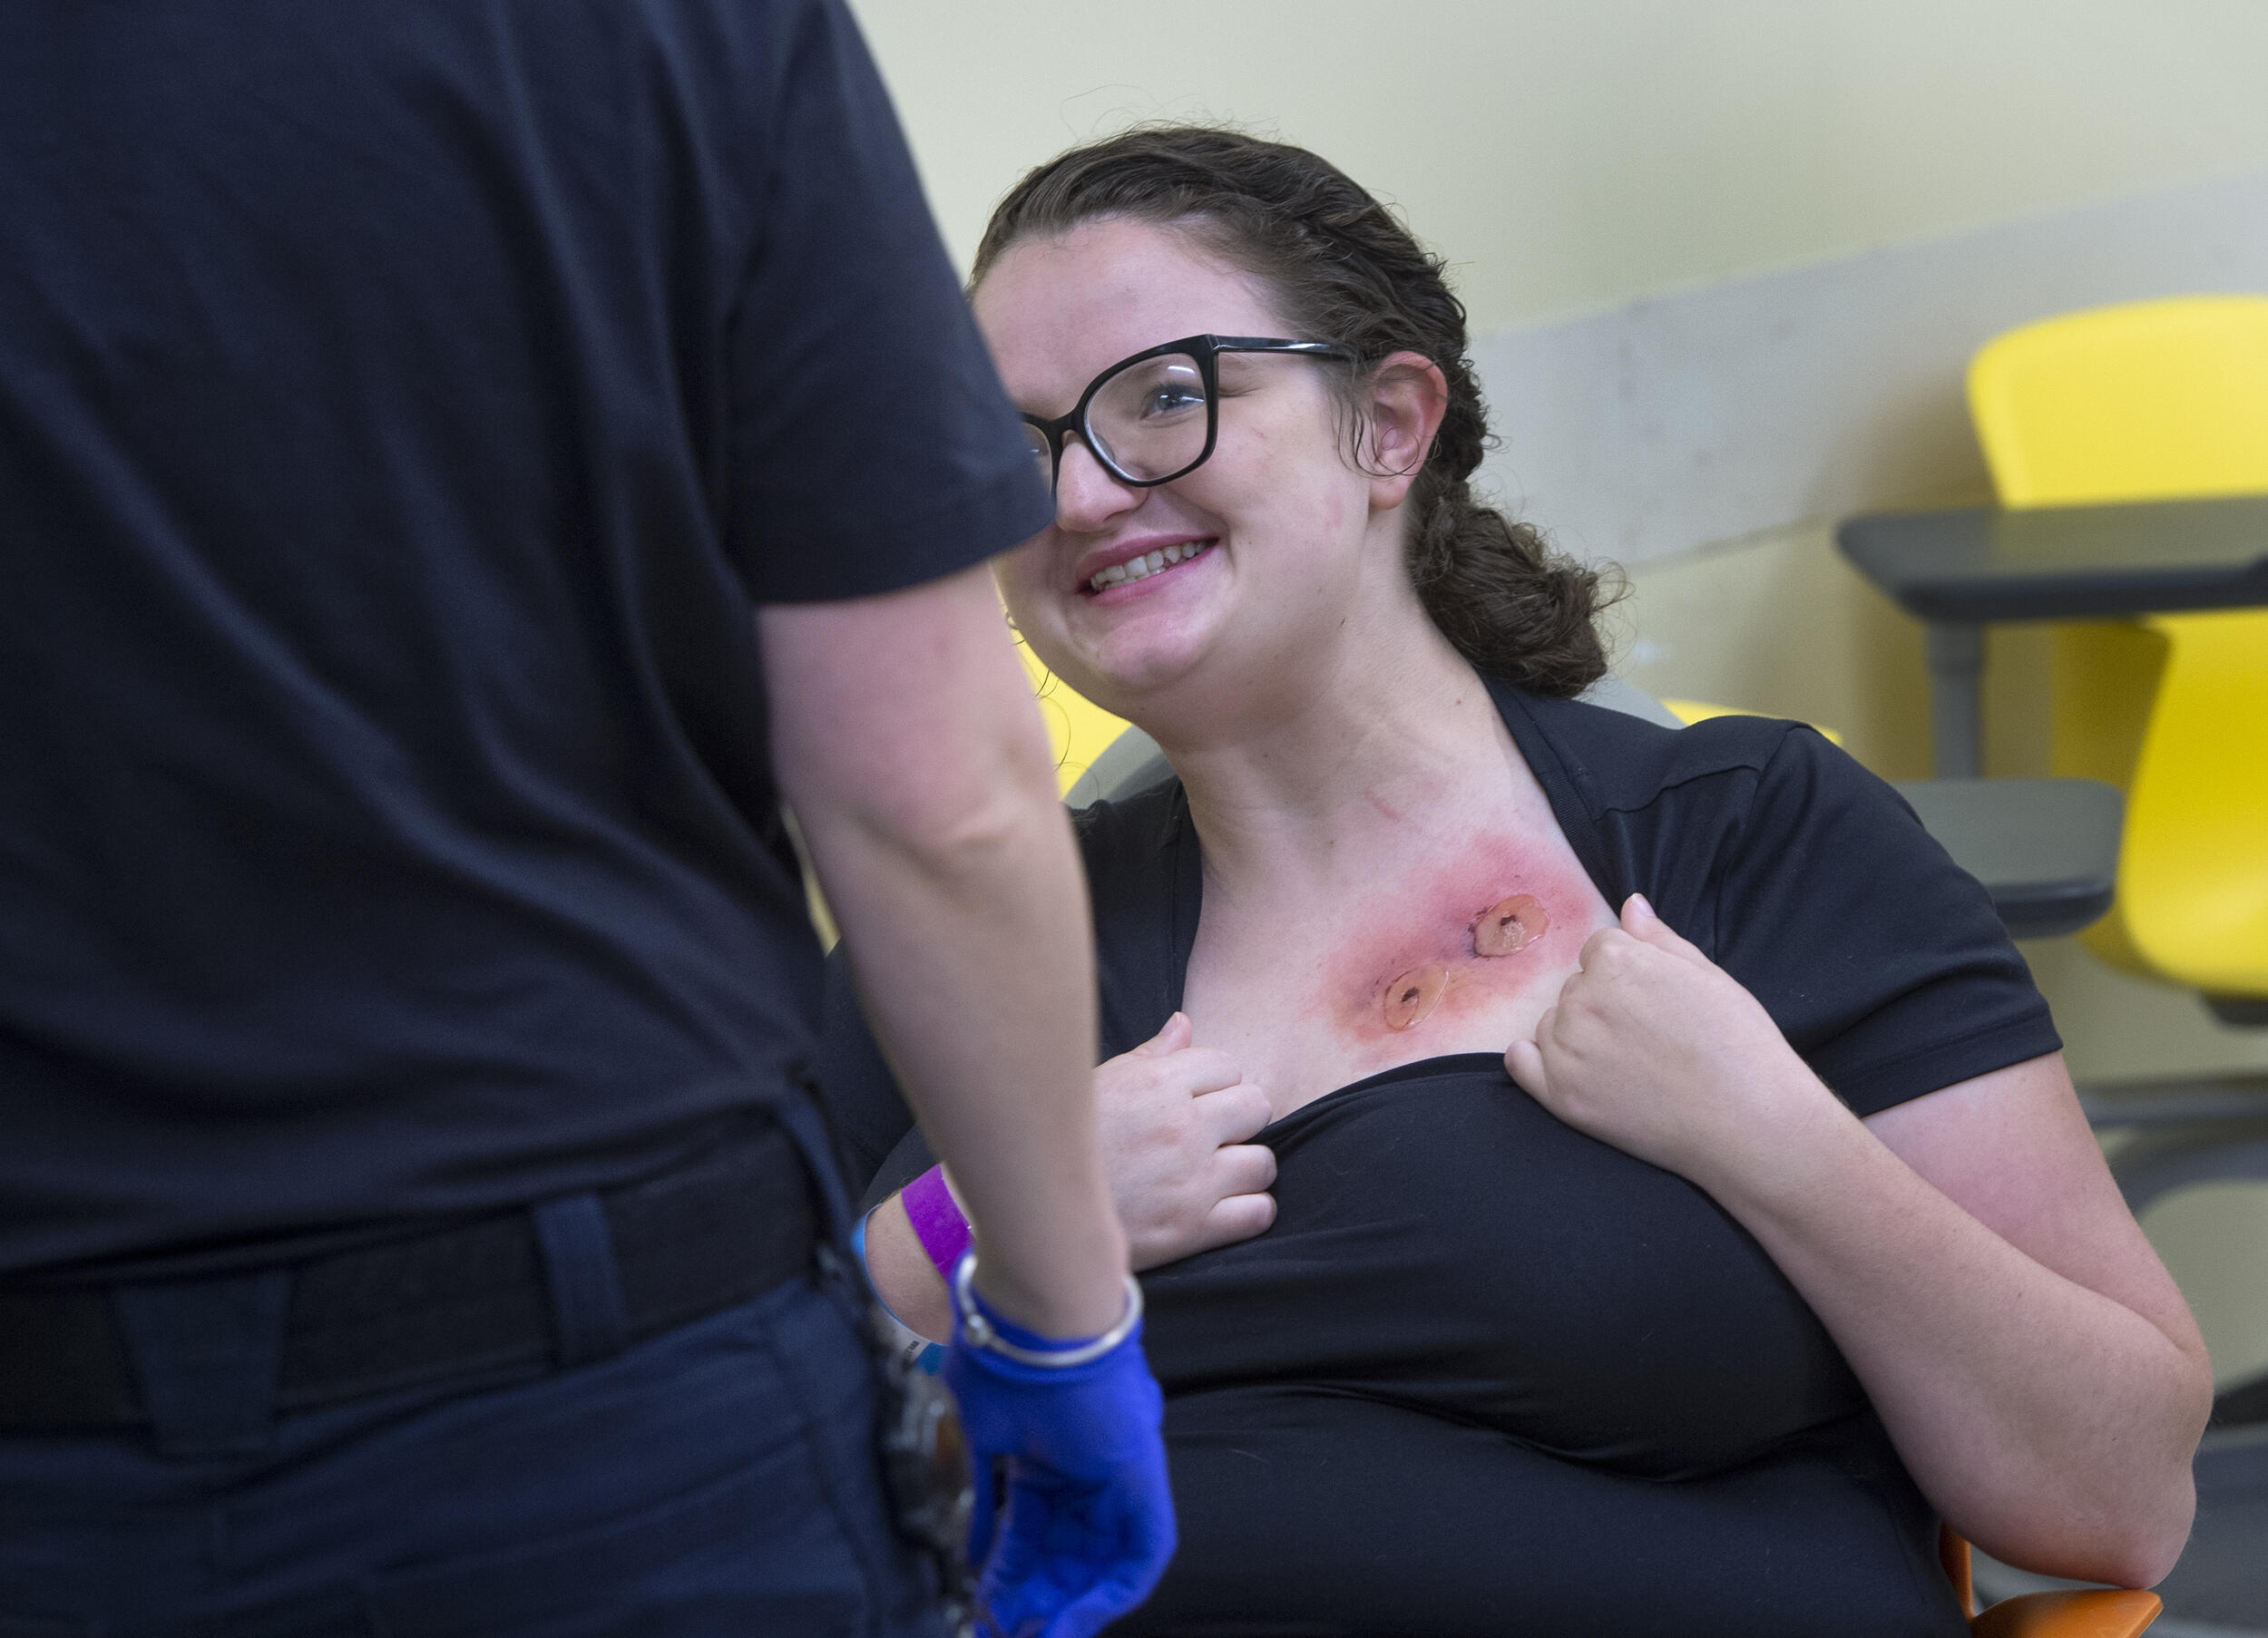 A woman smiling while holding down the color of her shirt to show two wounds made with special effects makeup. 